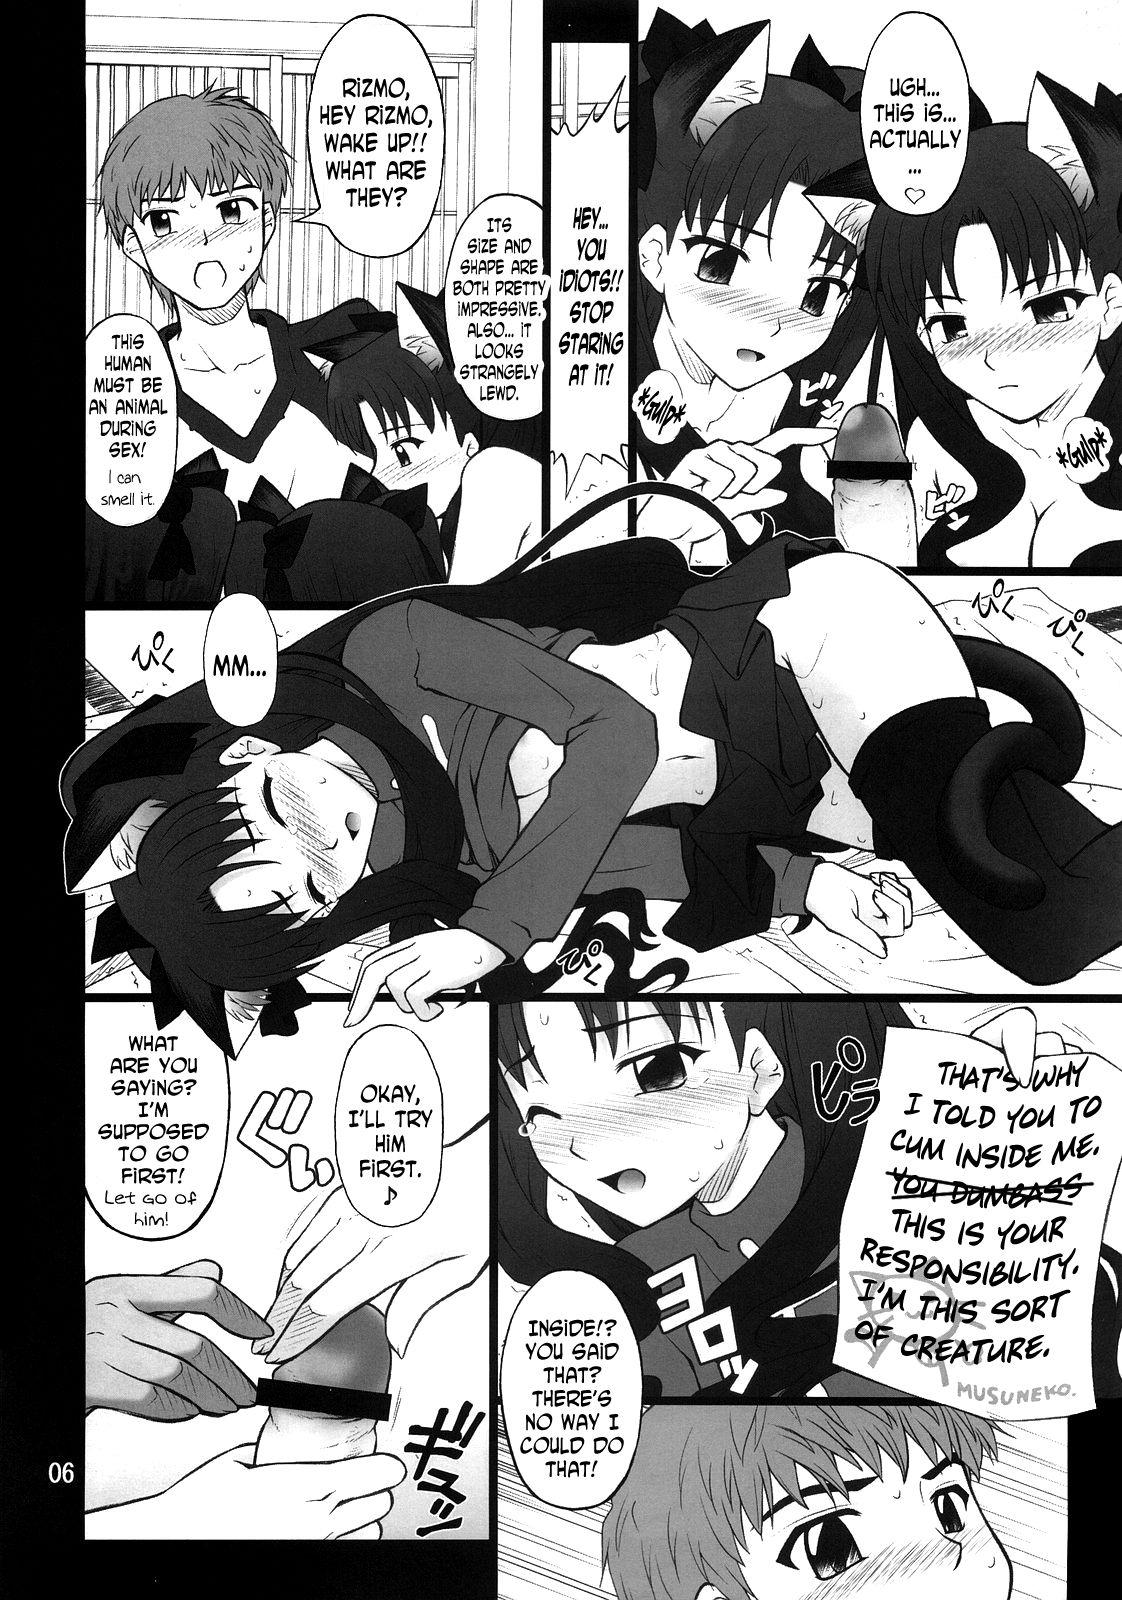 Boquete Grem-Rin 2 - Fate stay night Titties - Page 5